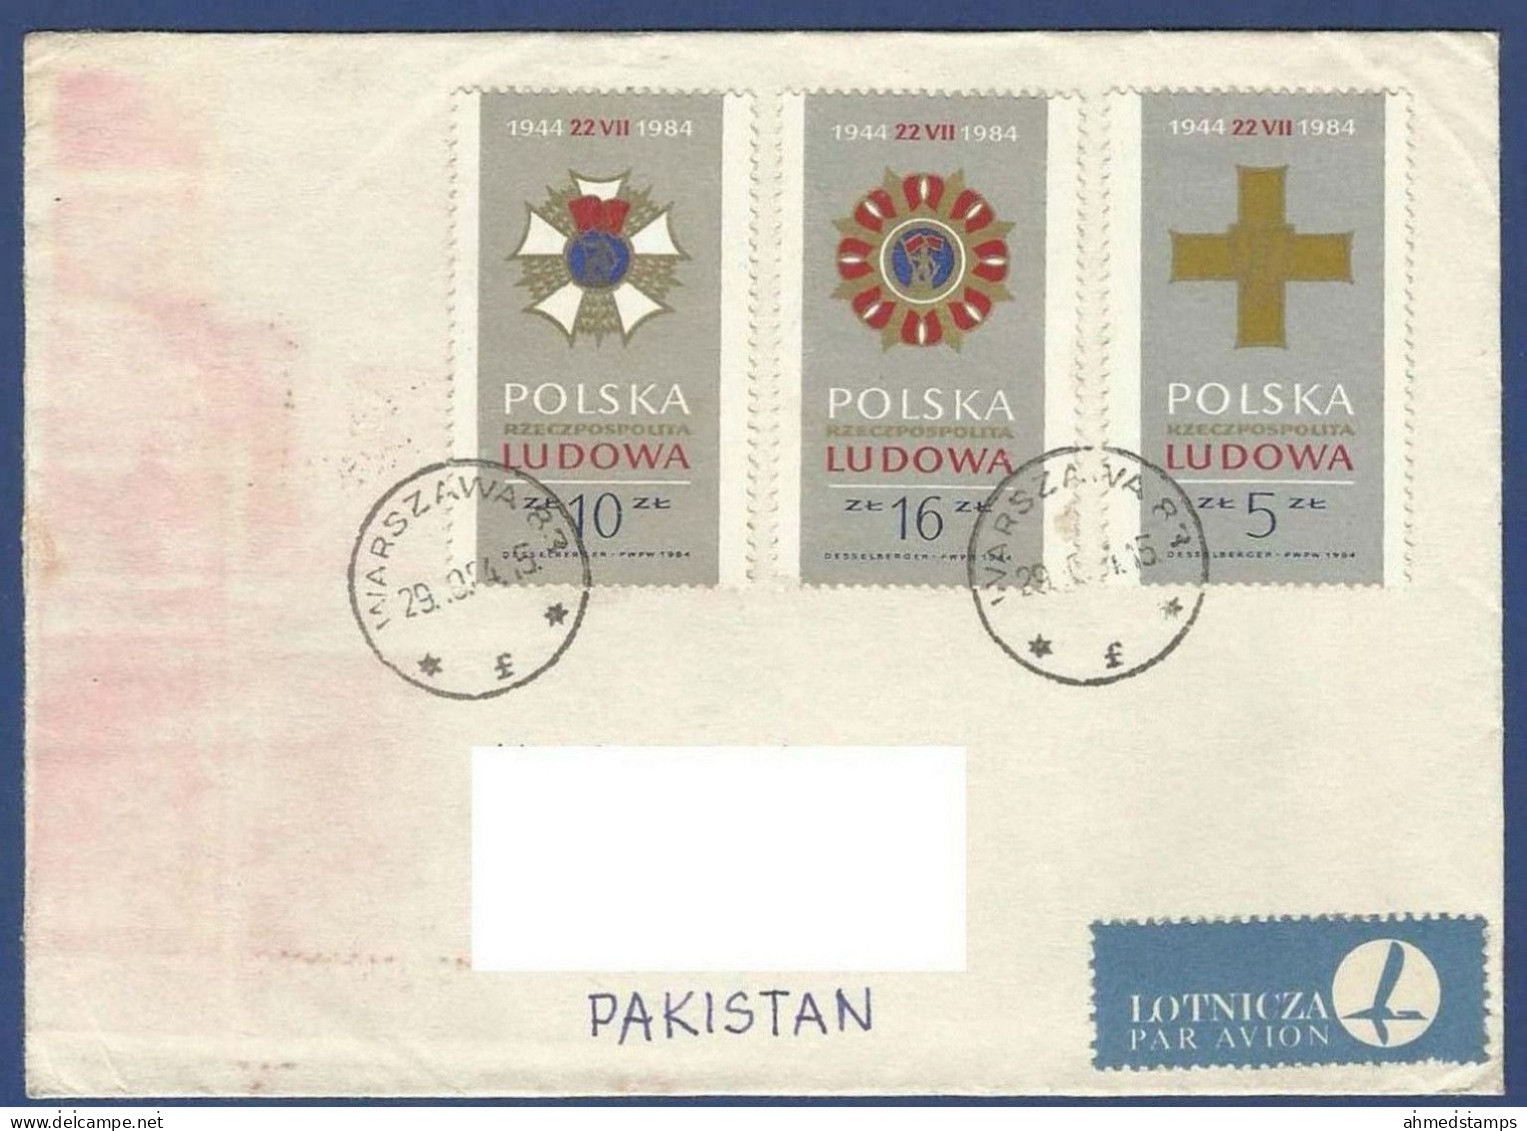 POLAND POSTAL USED AIRMAIL COVER TO PAKISTAN - Sin Clasificación